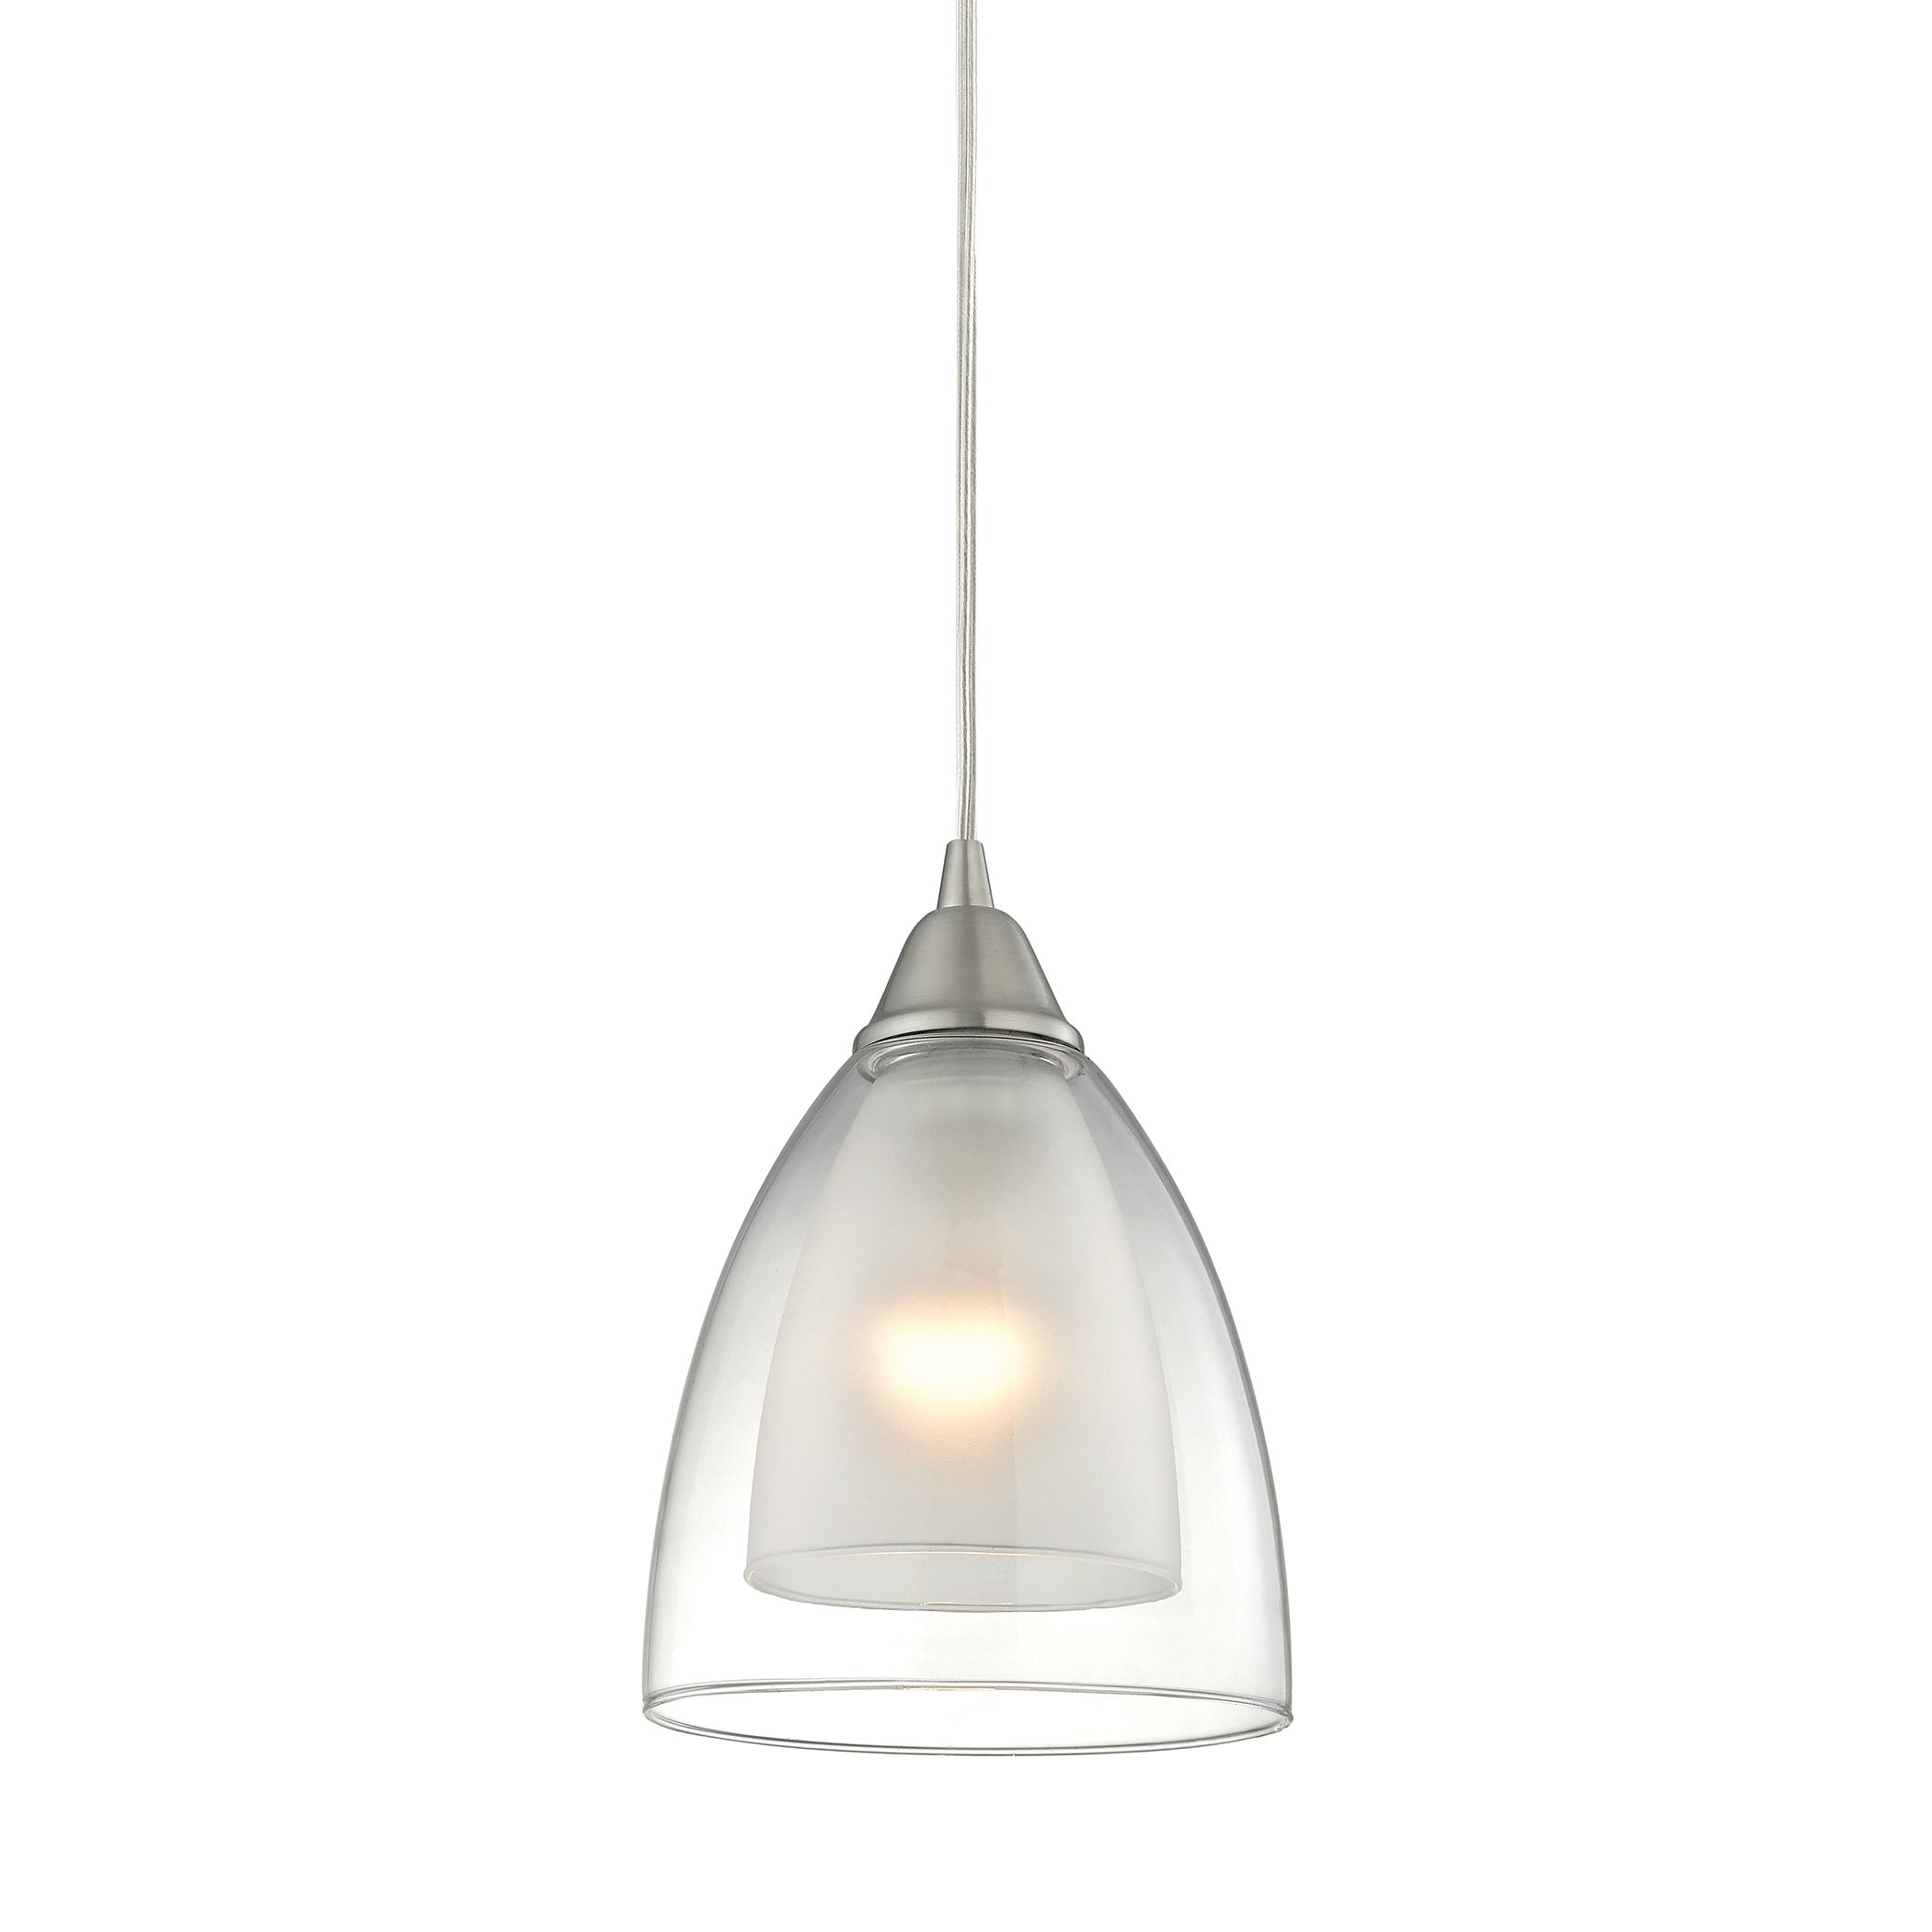 ELK Lighting 10464/1 Layers 1-Light Mini Pendant in Satin Nickel with Clear Glass